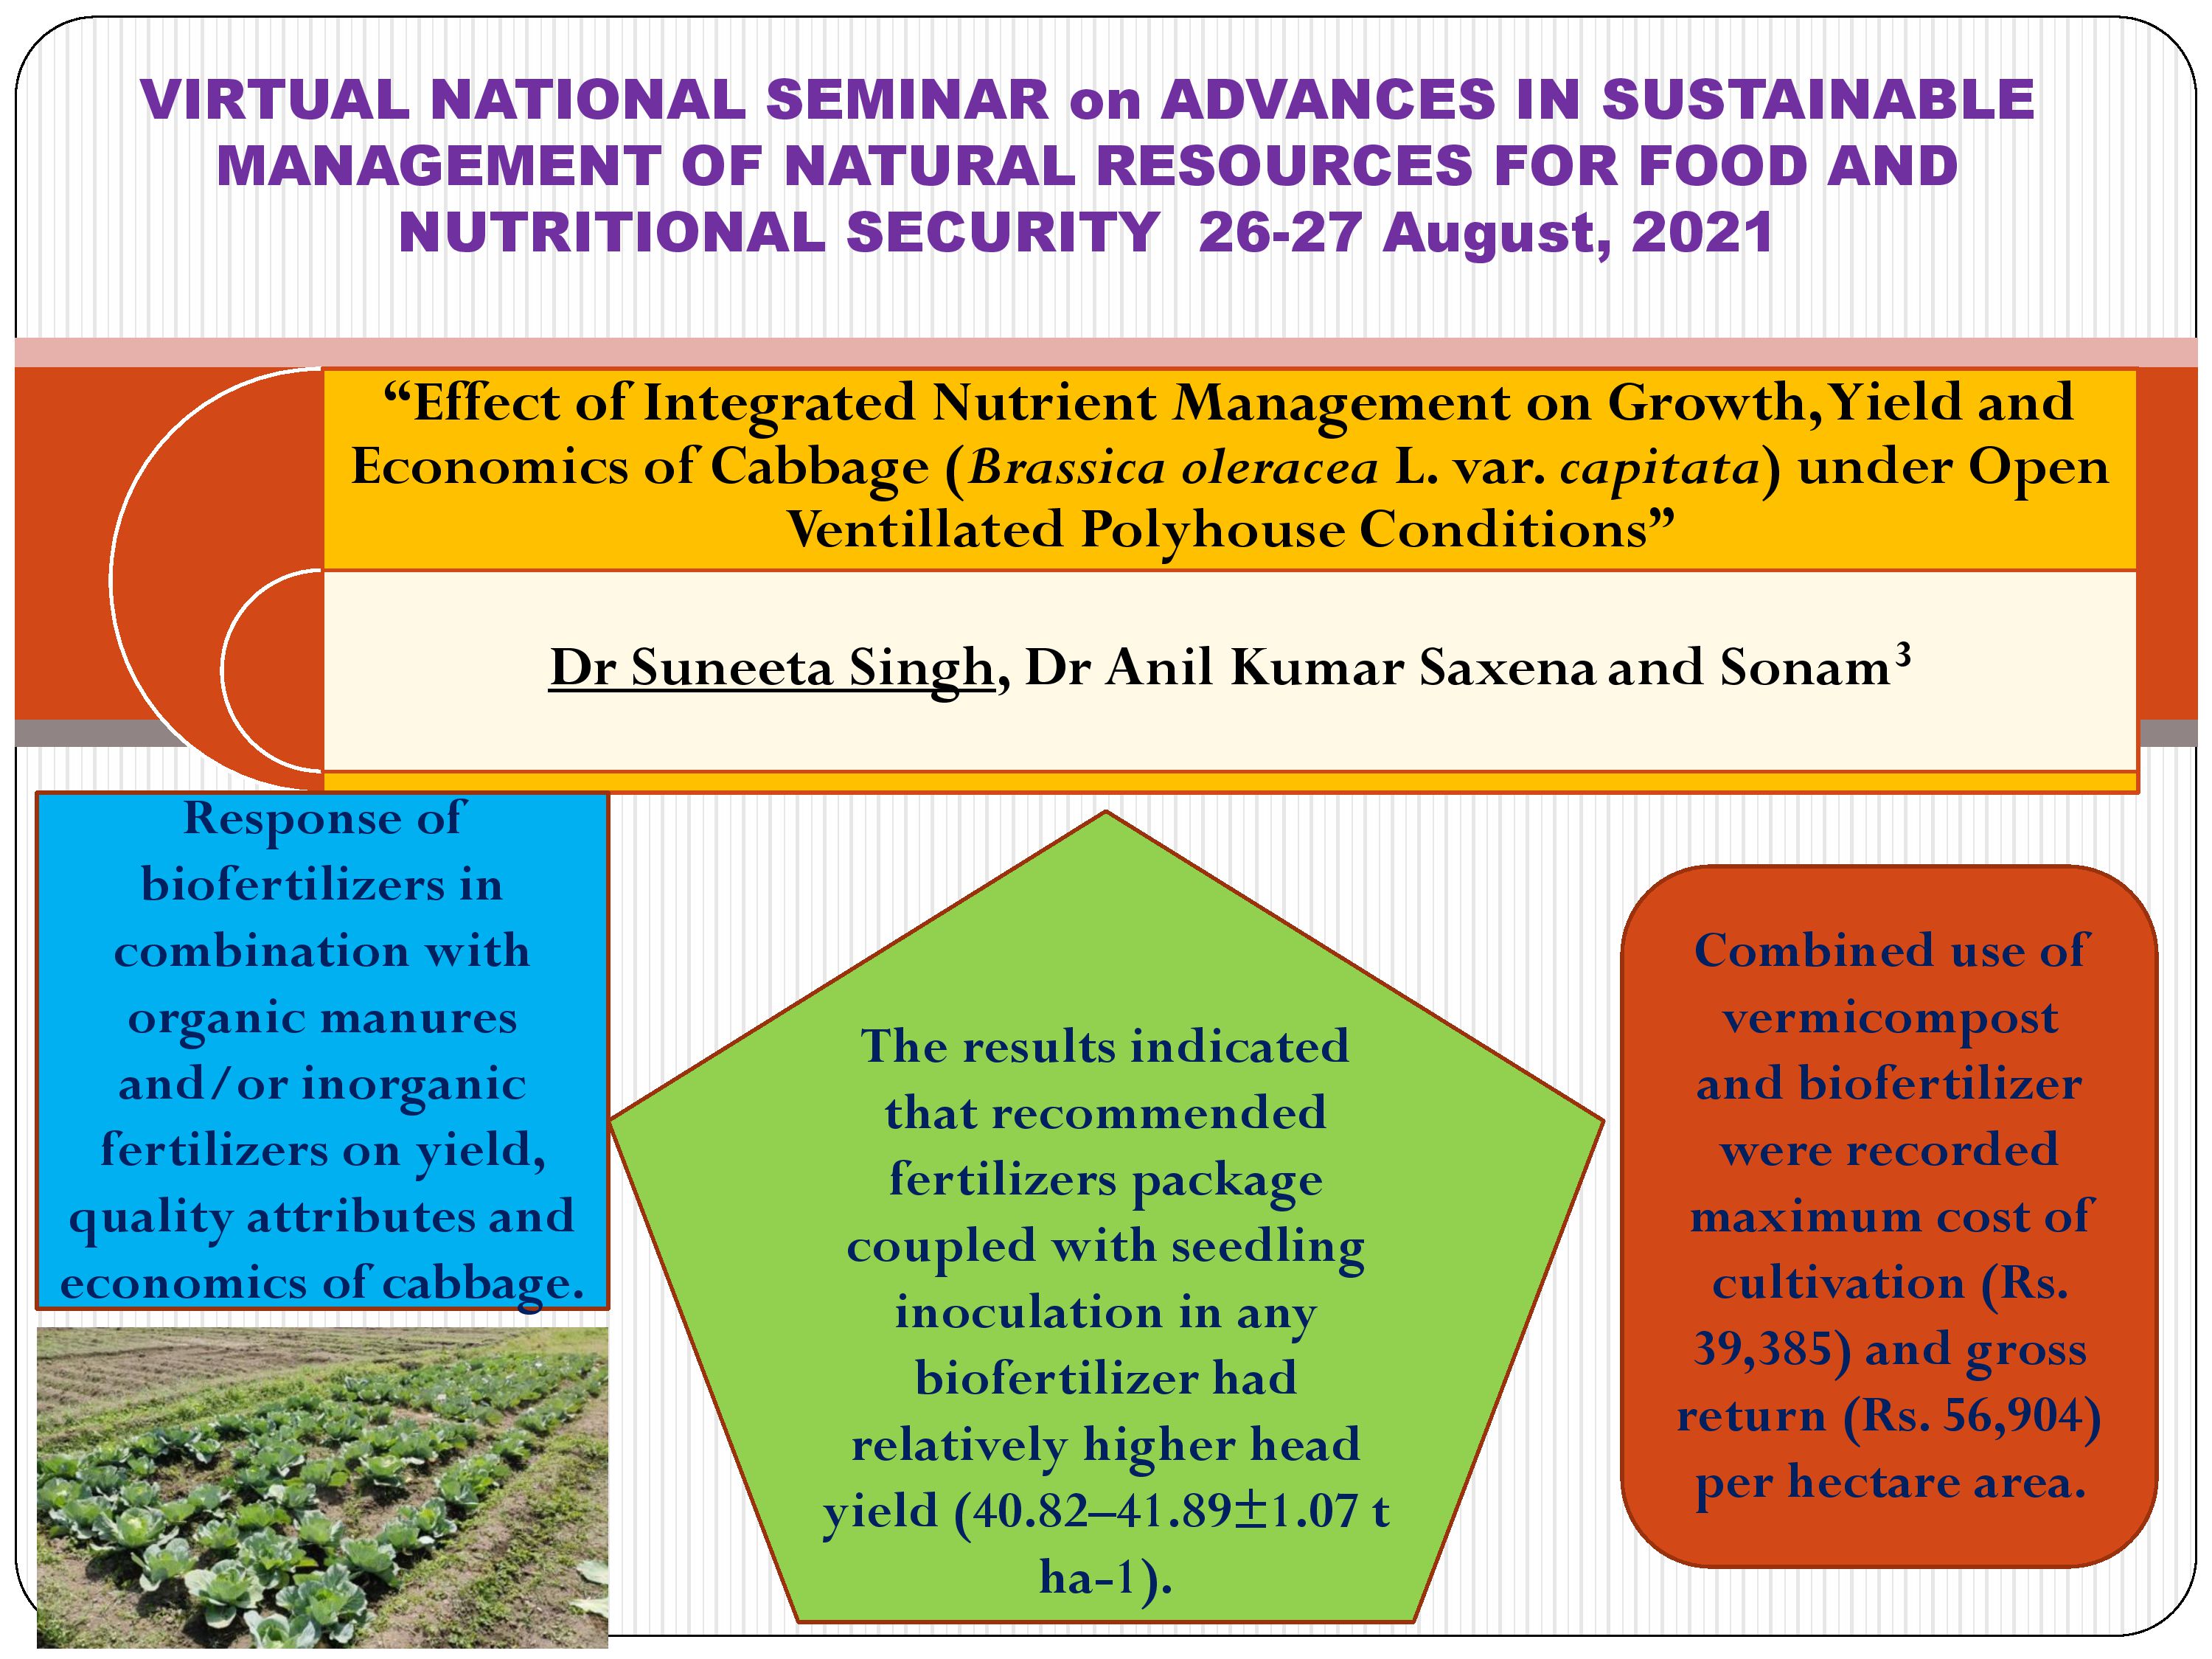 Effect of Integrated Nutrient Management on Growth, Yield and Economics of Cabbage under open Ventillated Polyhouse Conditions